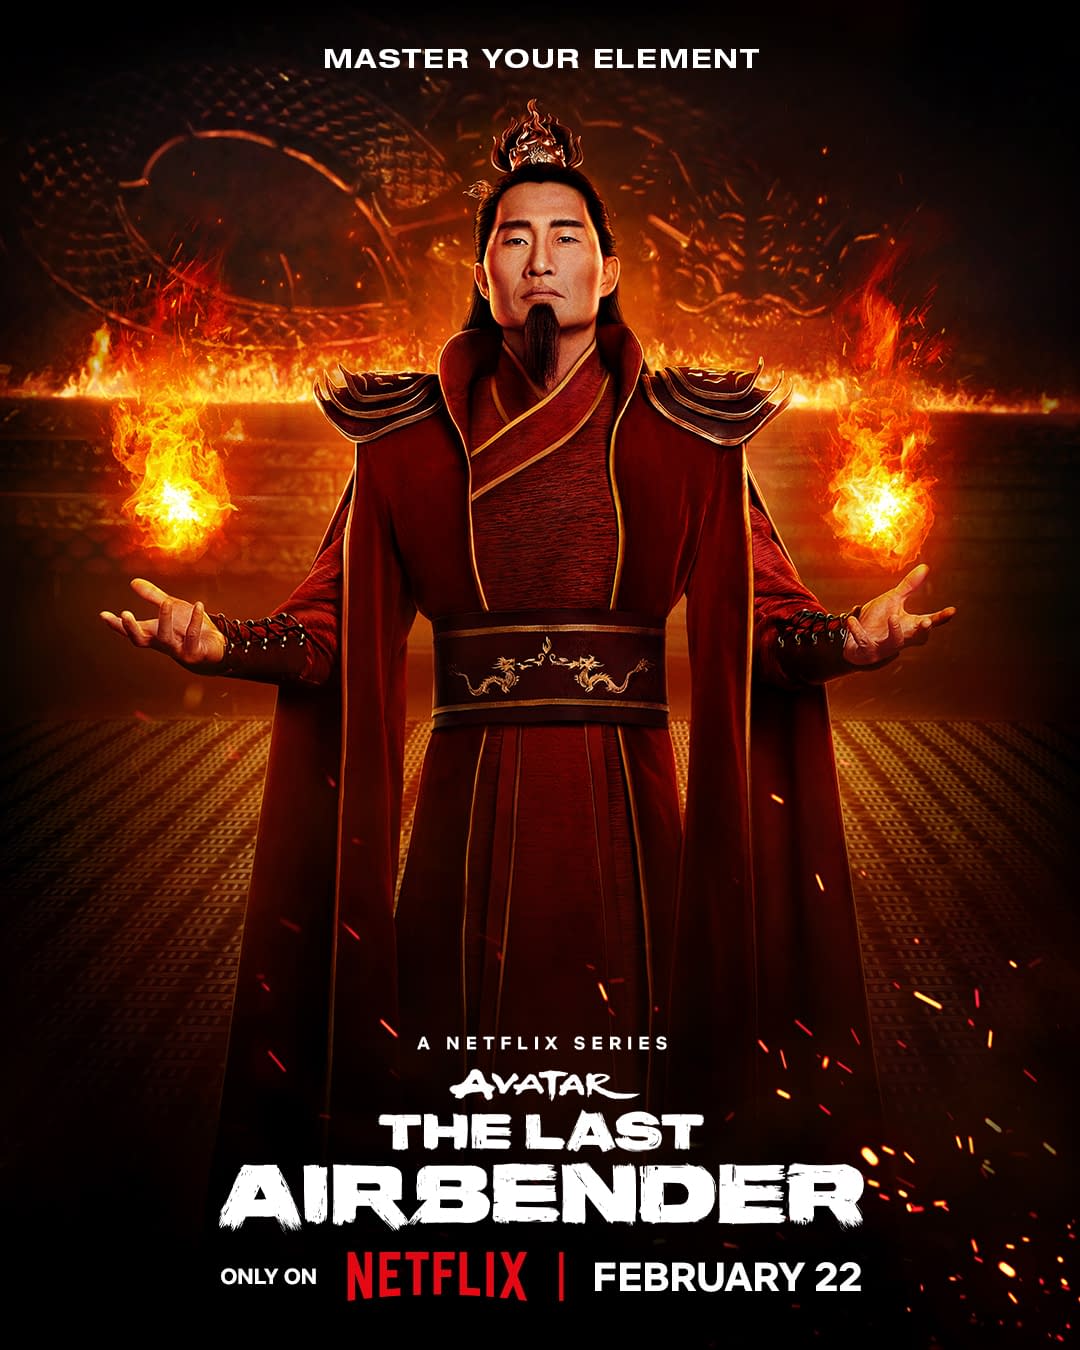 Avatar: The Last Airbender Character Posters Spotlight Fire Nation